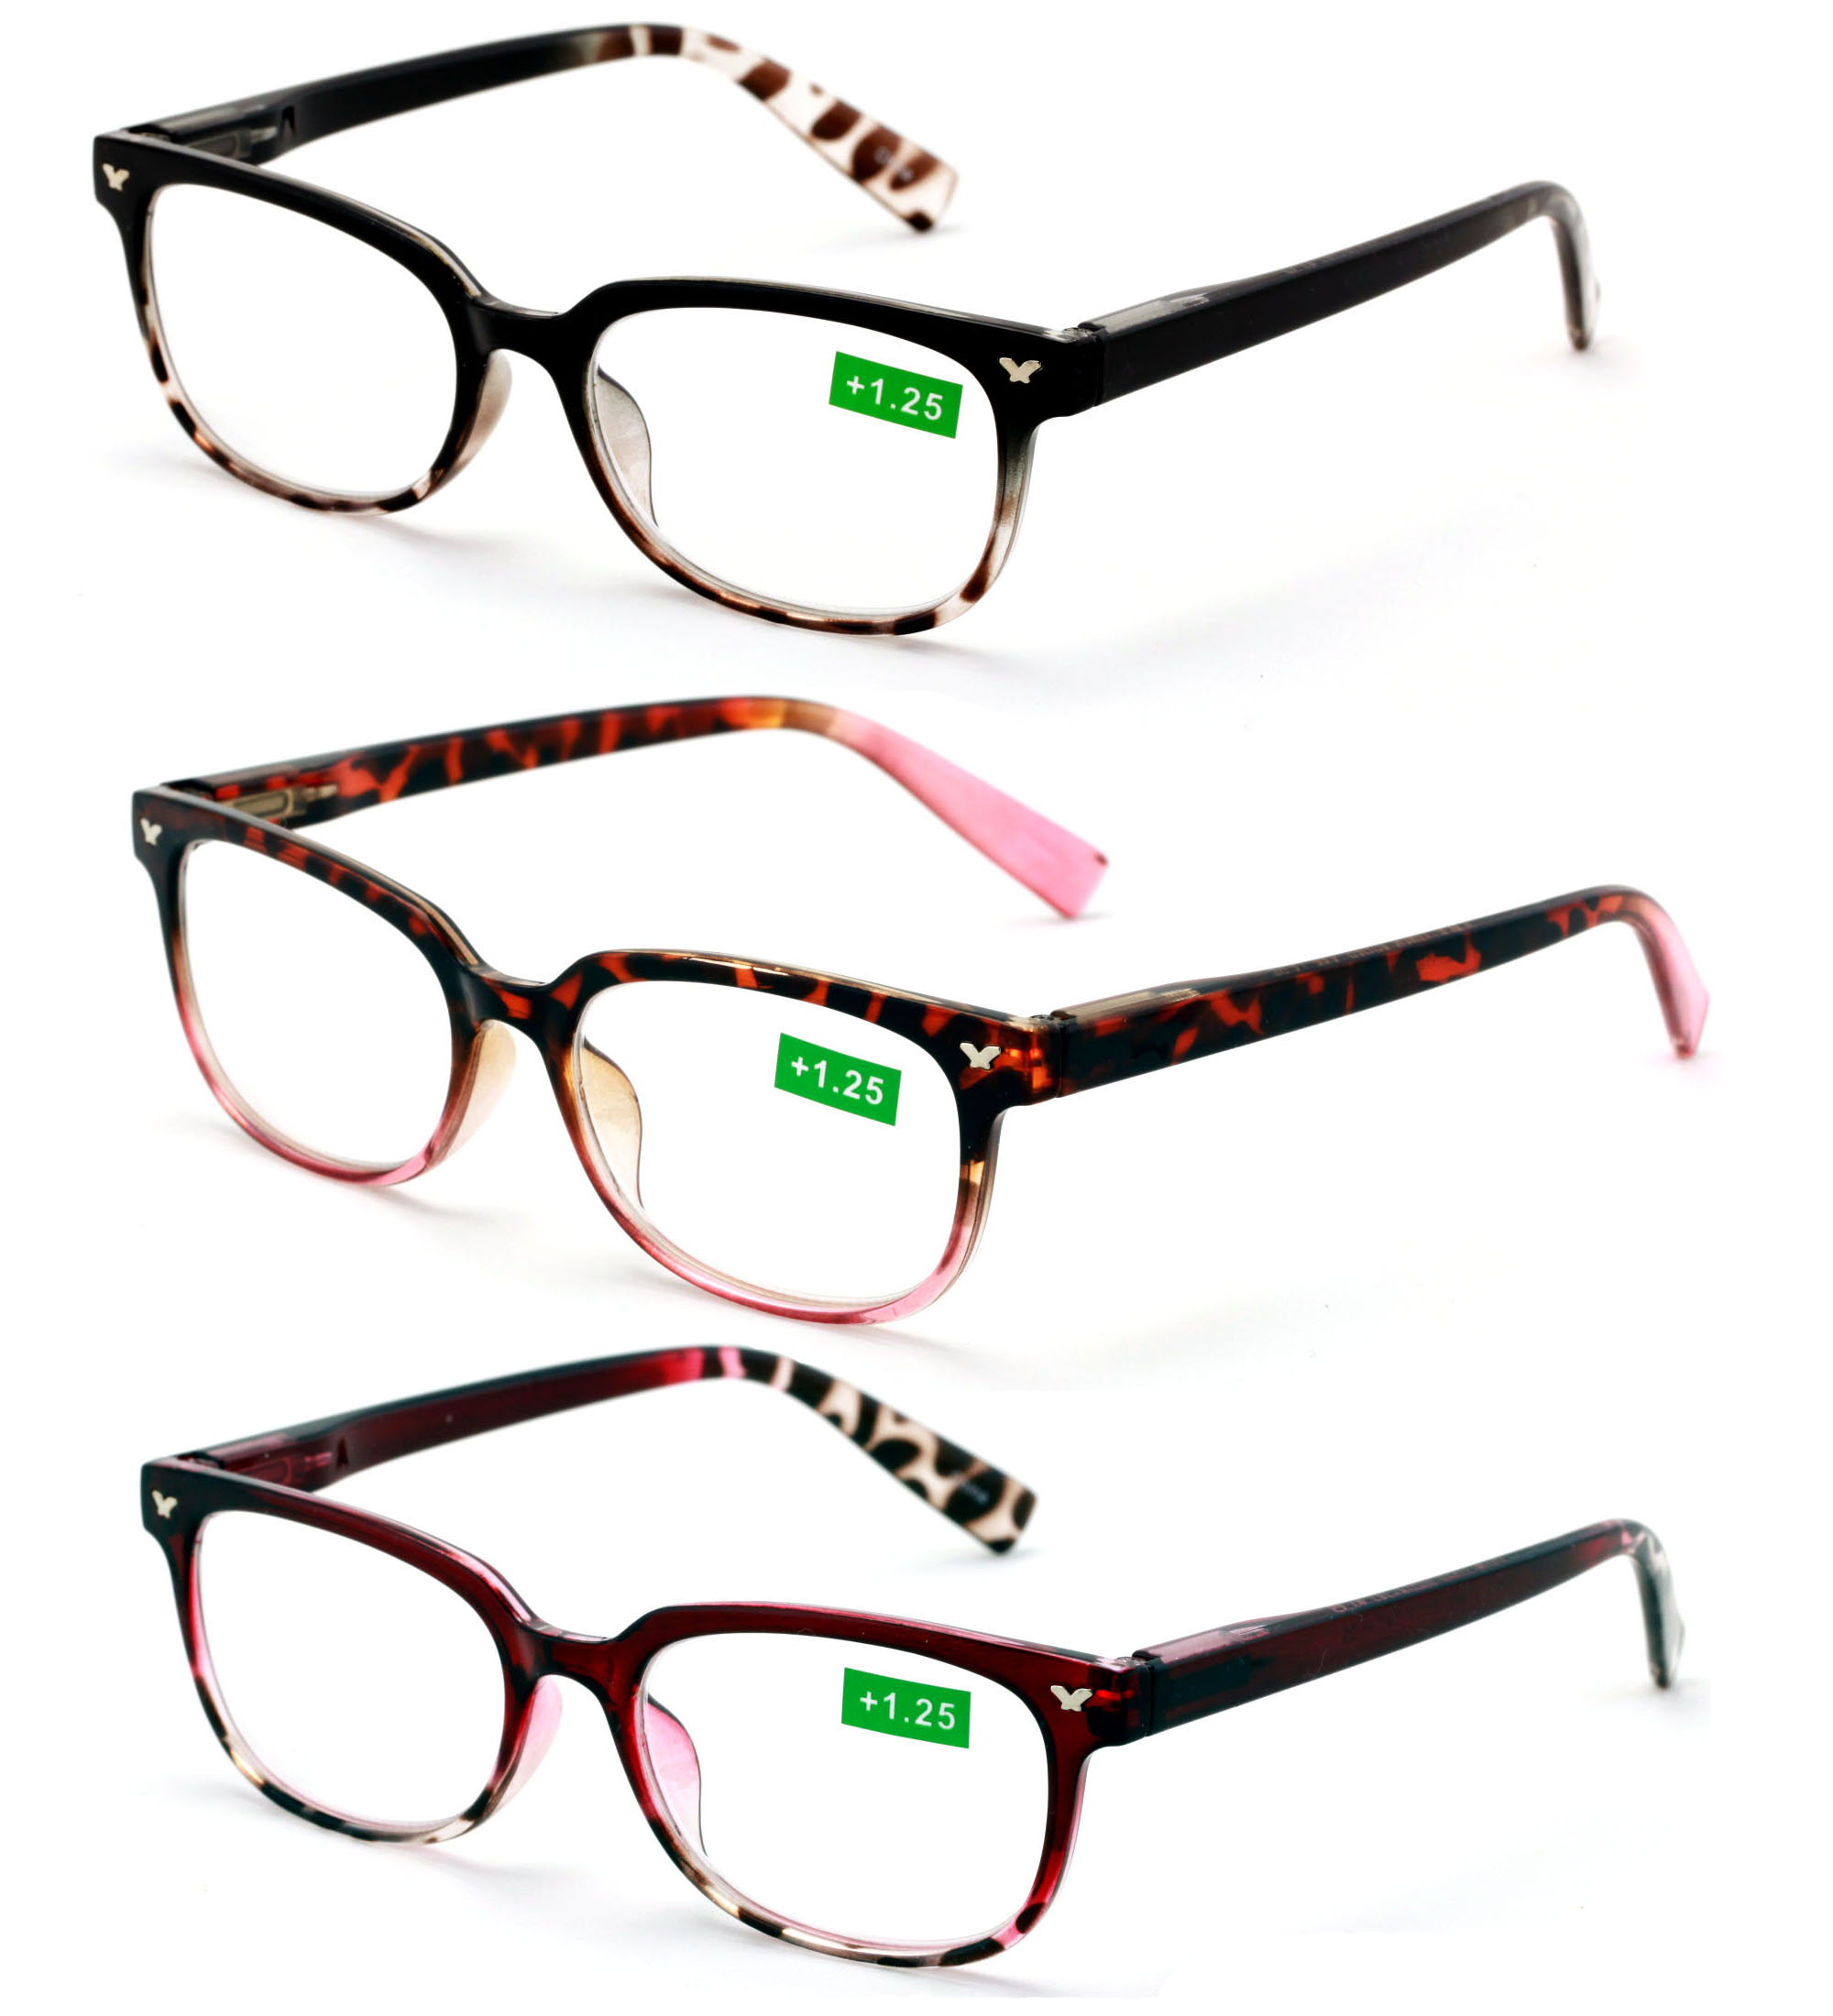 3 Pairs Of Women Classic Reader With Spring Hinges Half Translucent Tortoise Reading Glasses